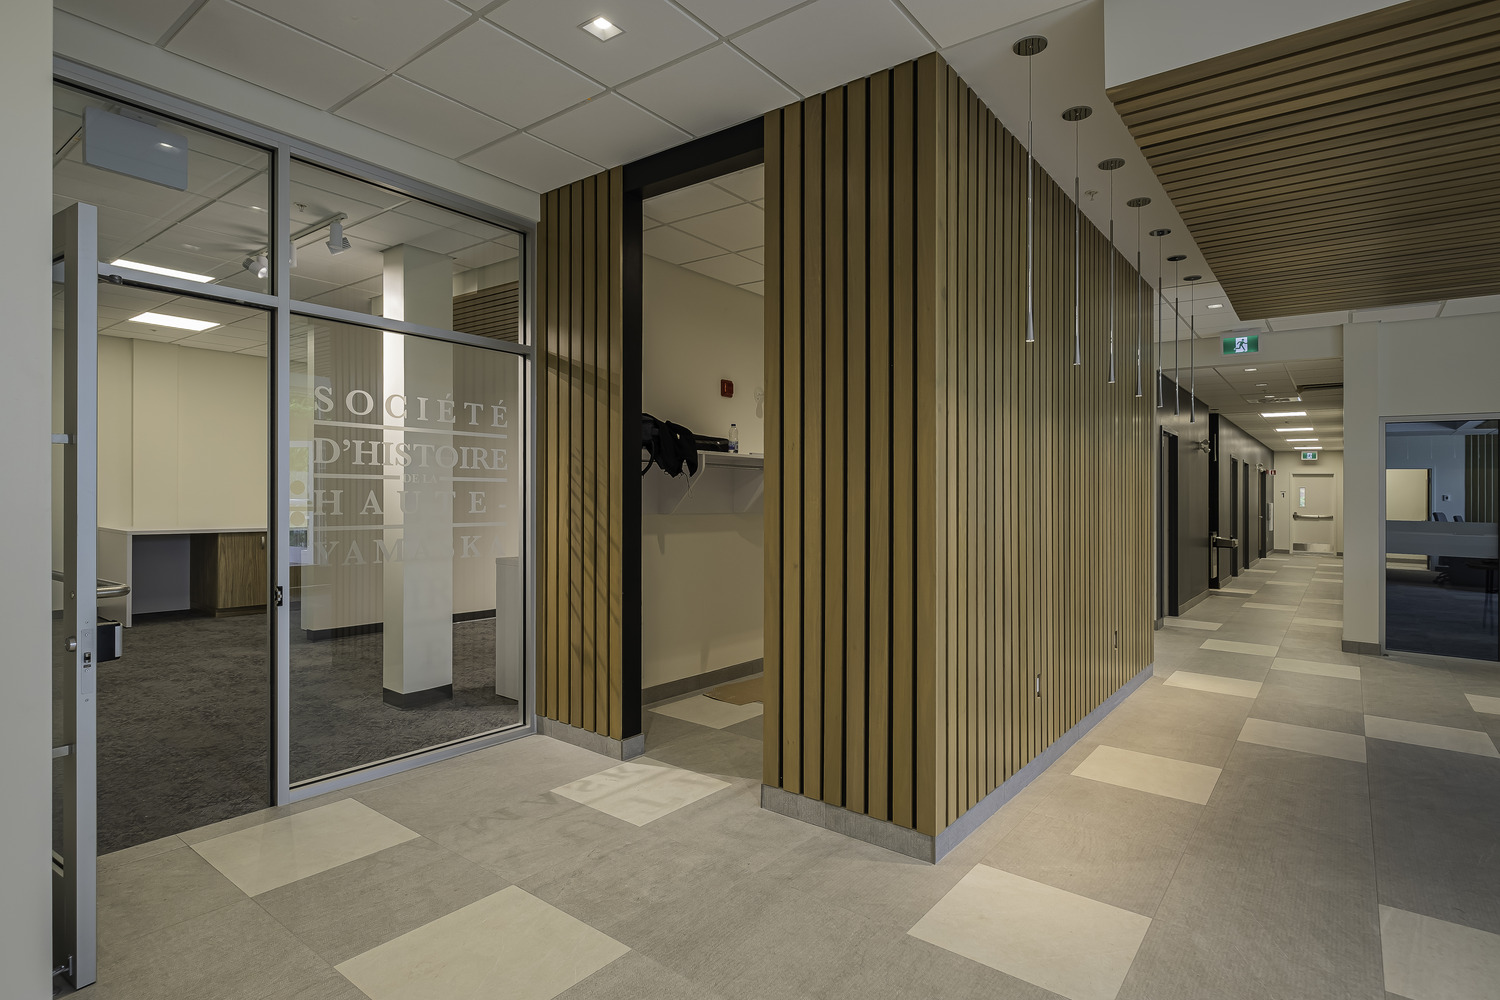 A modern office hallway with wooden panel accents and a glass door labeled "Société d'Histoire." The floor is tiled, and the ceiling features recessed lighting. The hallway leads to additional rooms.